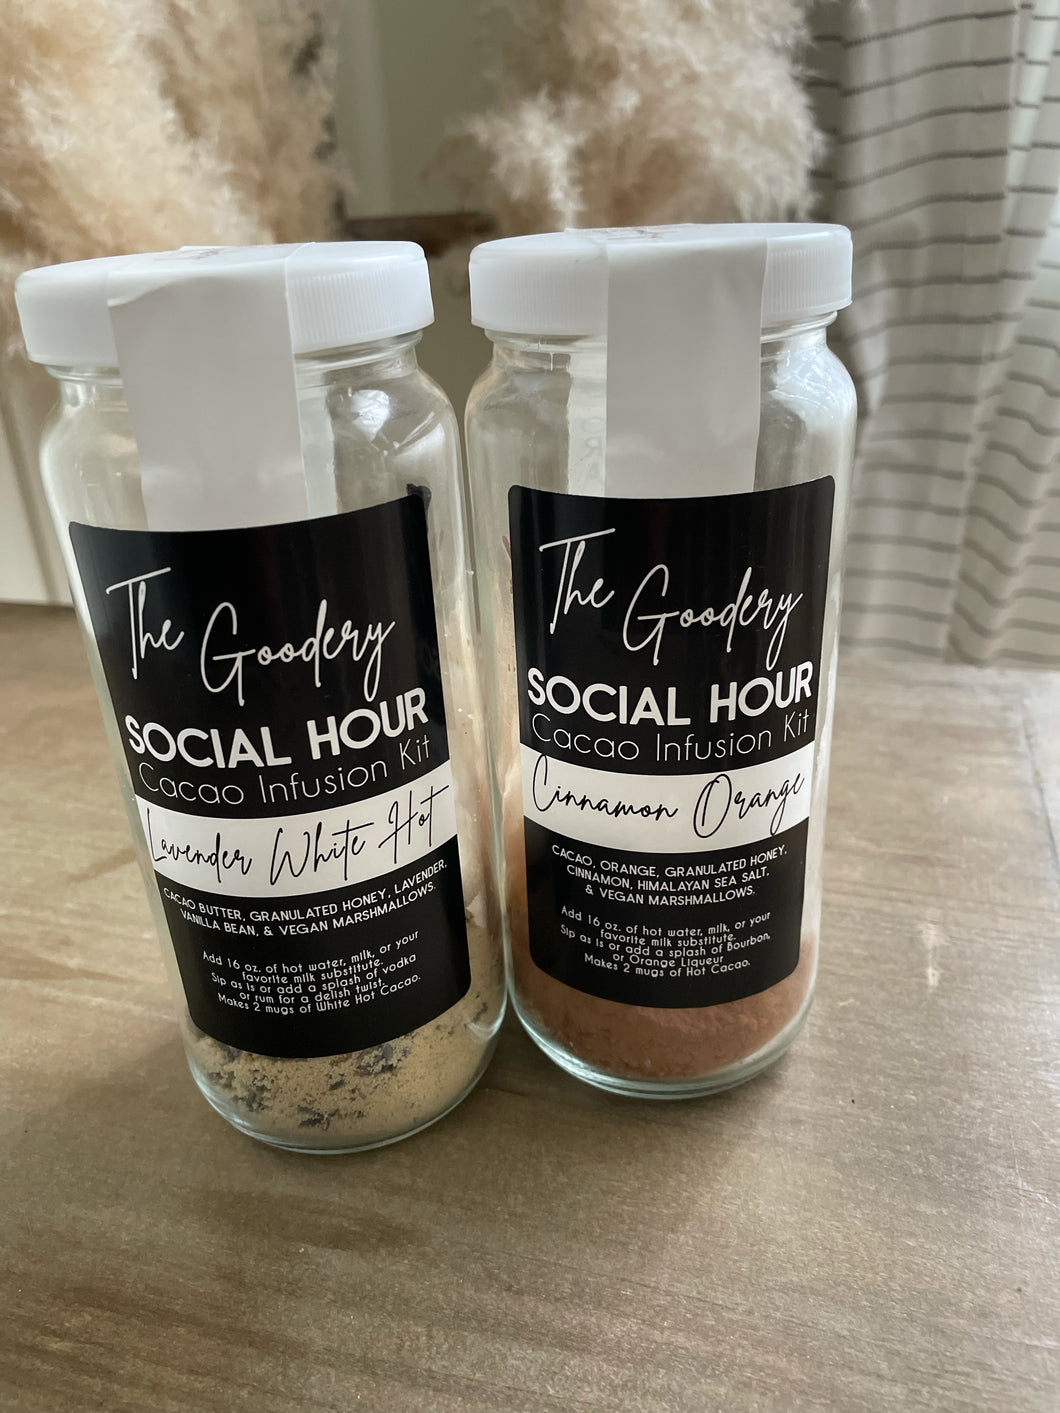 SOCIAL HOUR HOT CACAO INFUSION KIT BUNDLES